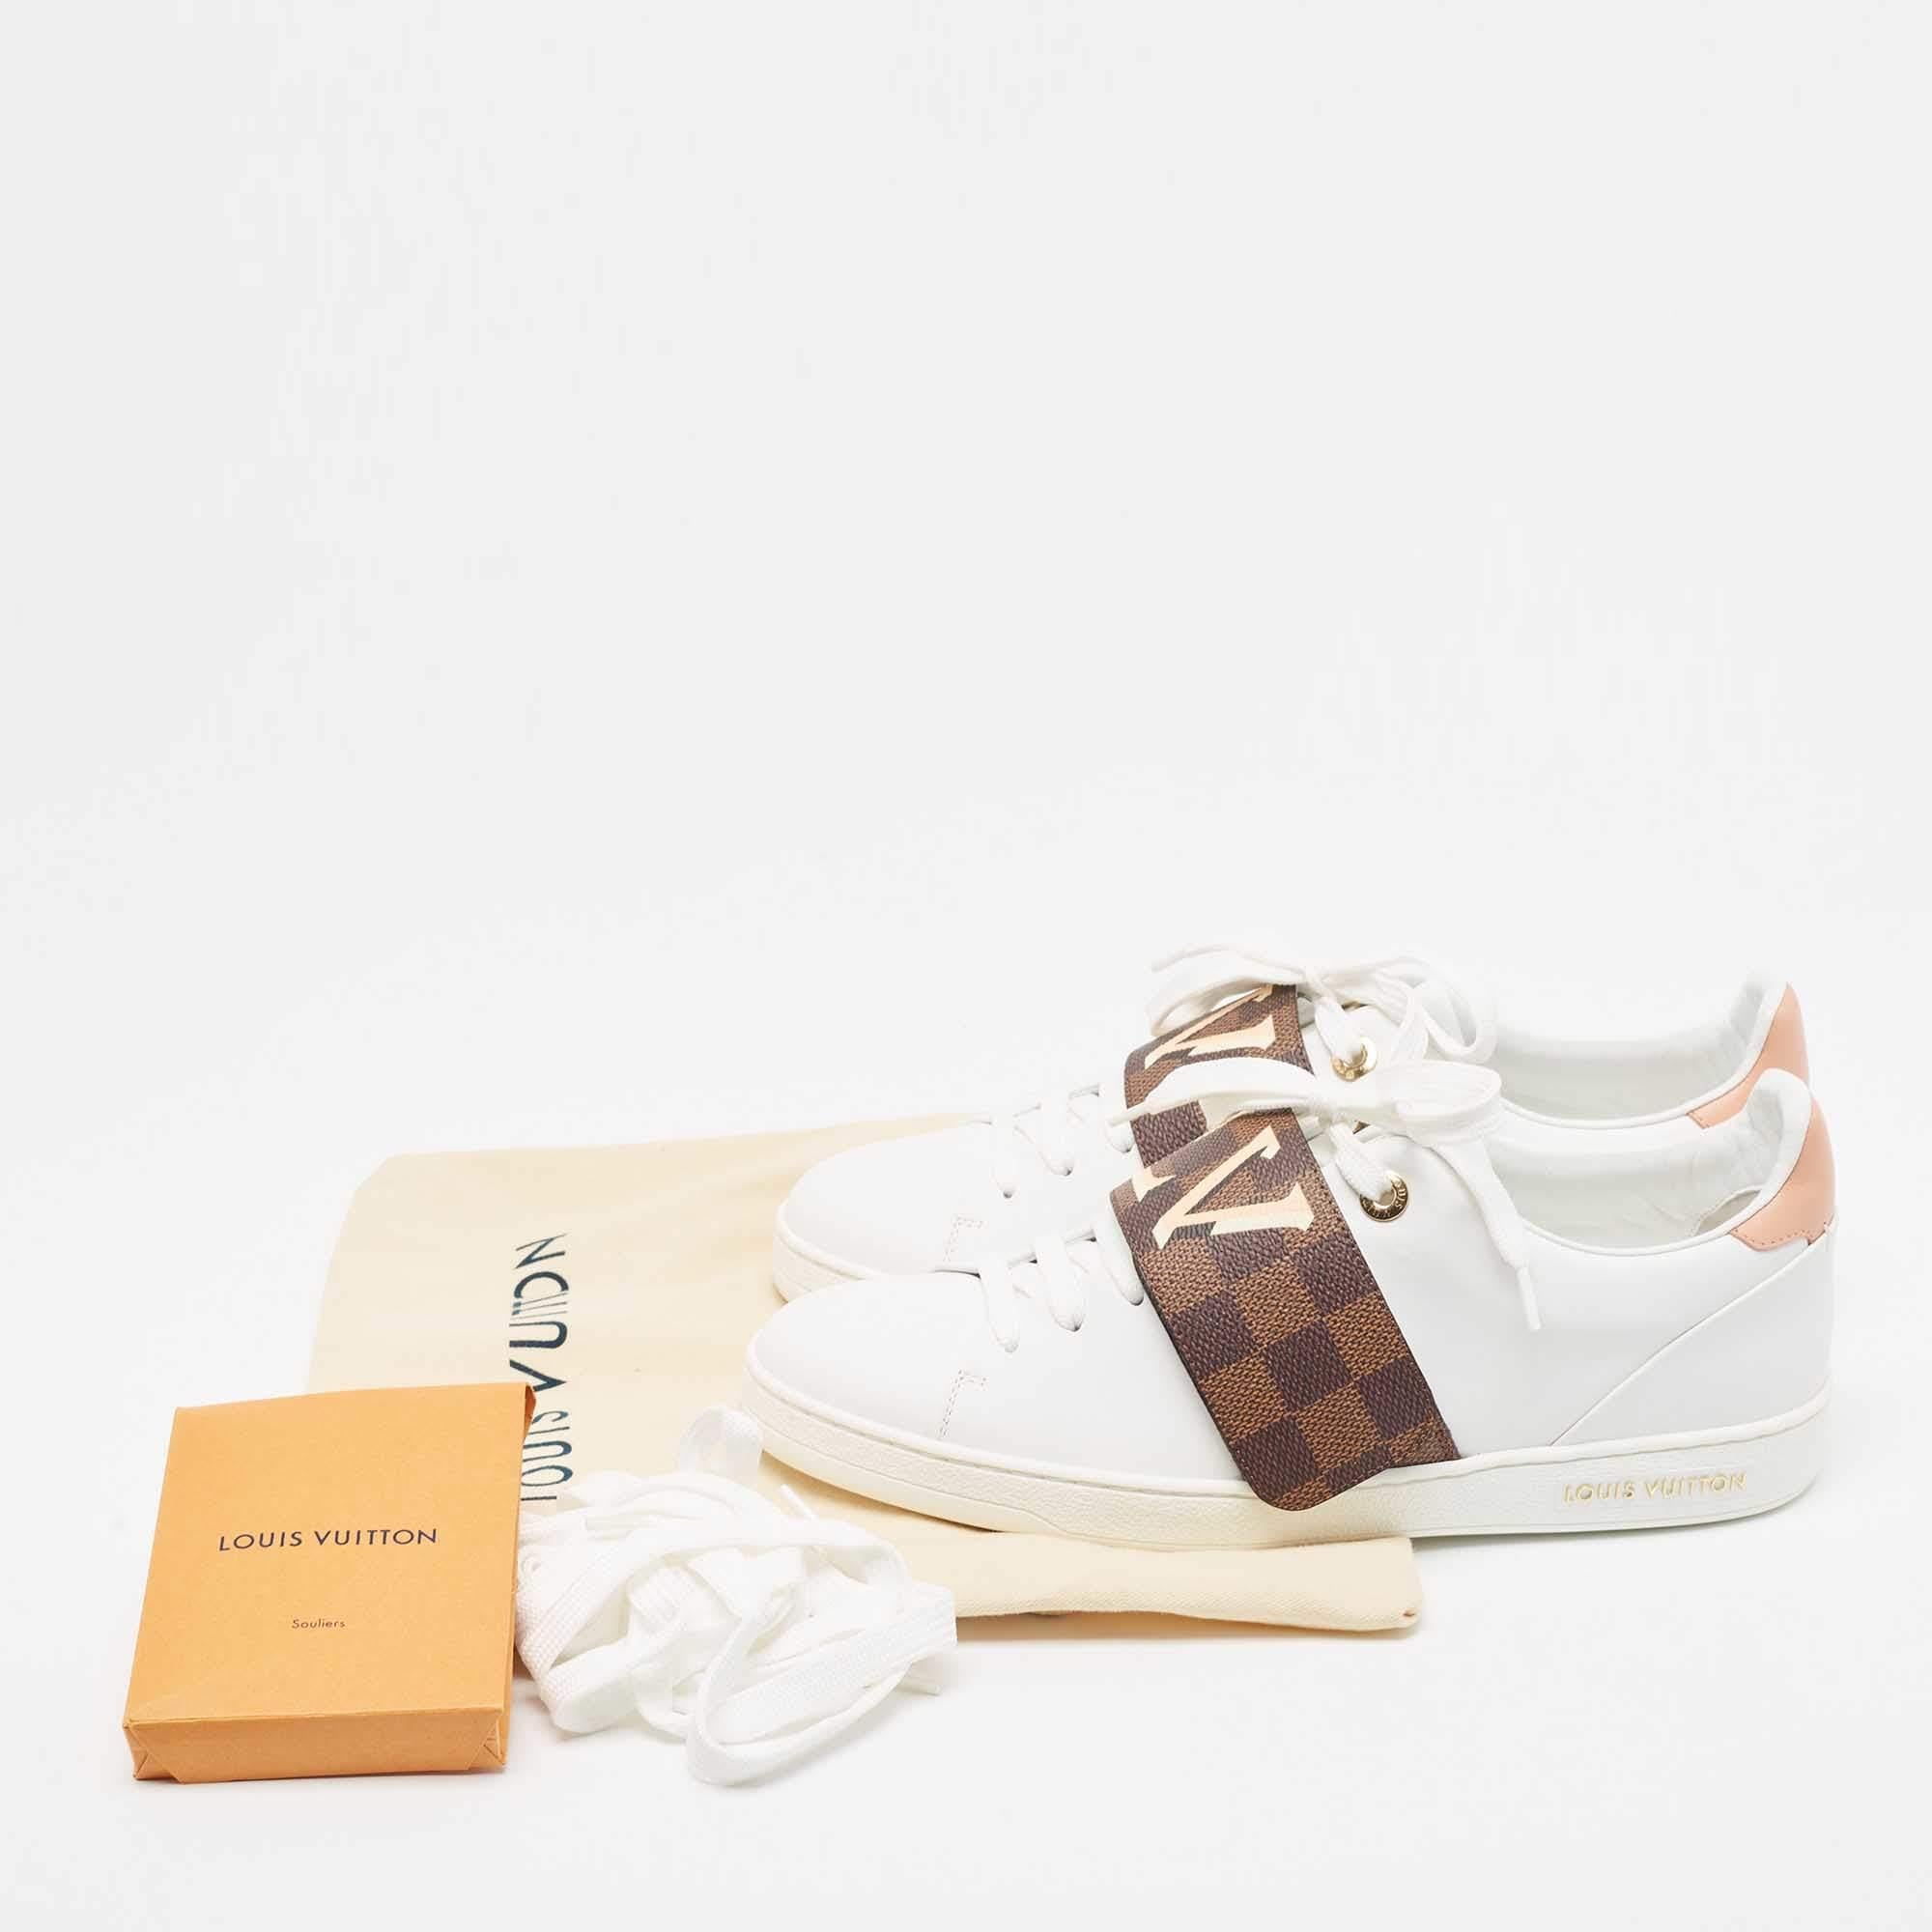 Louis Vuitton White/Monogram Canvas and Leather Frontrow Sneakers Size 40 6